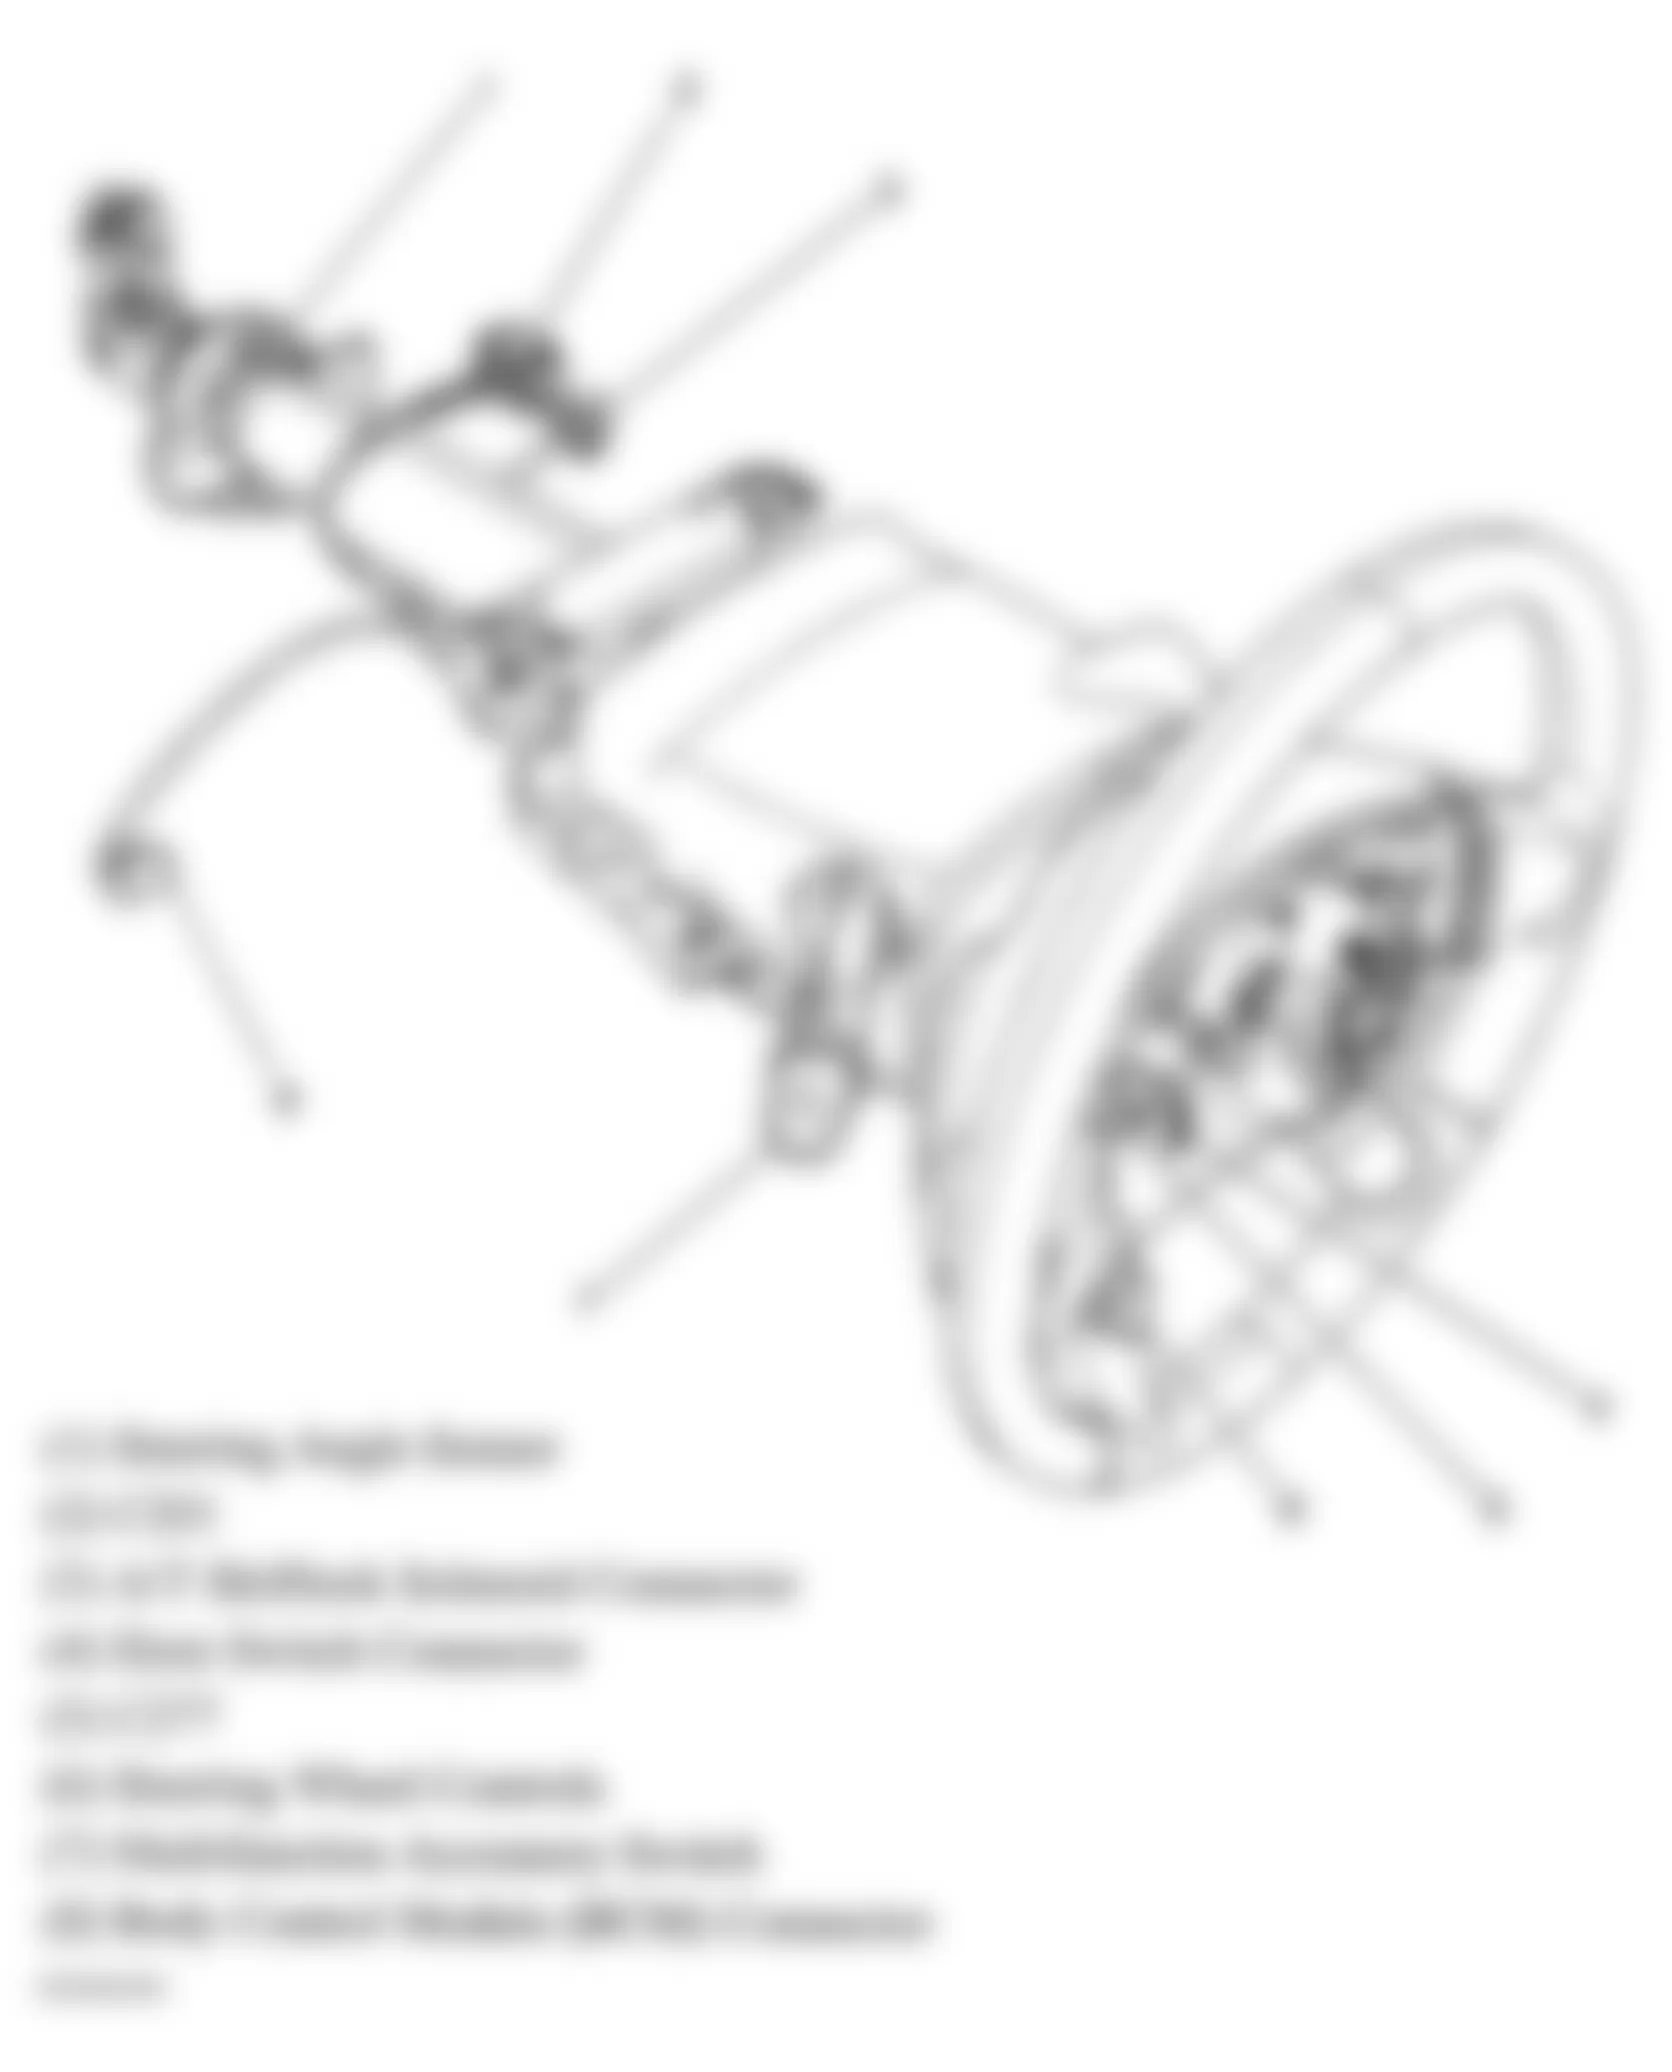 Buick Allure CXS 2005 - Component Locations -  Steering Column